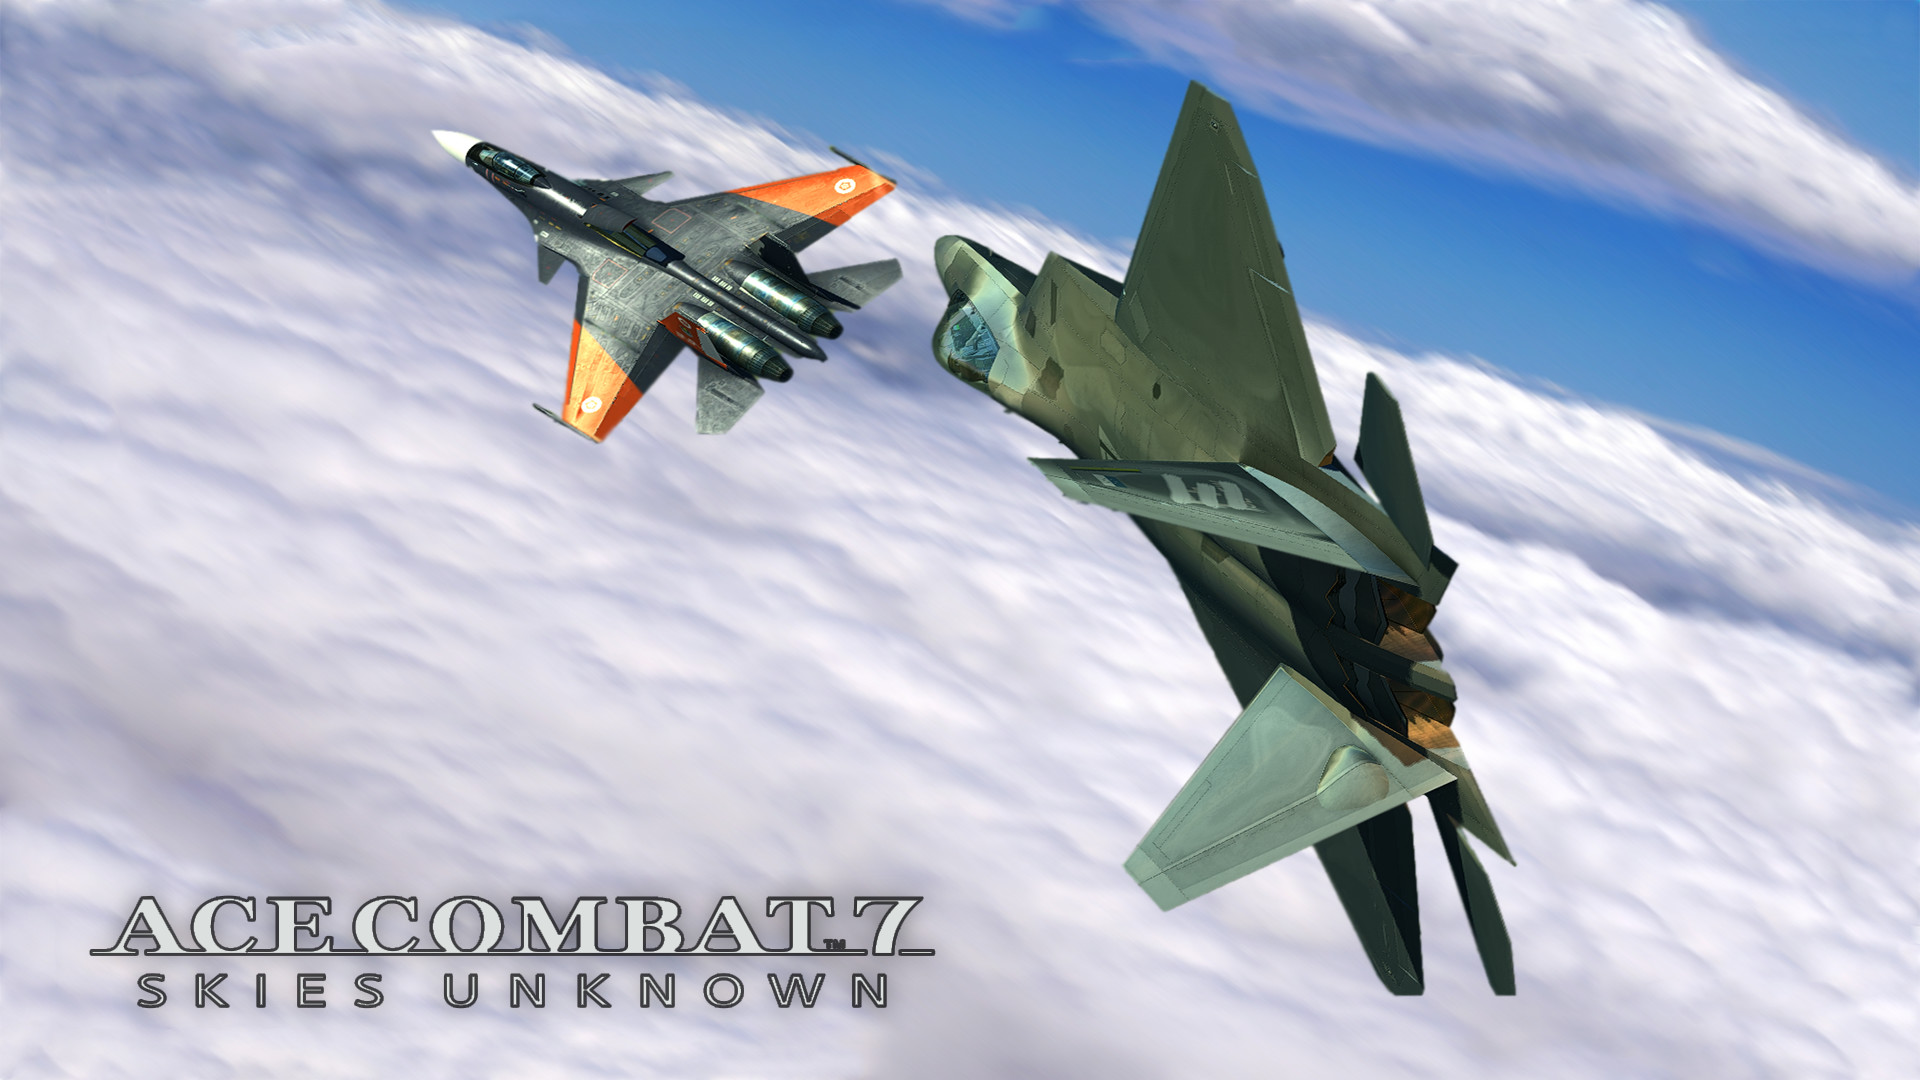 1920x1080 ... Ace Combat 7 Wallpaper 2 by BillyM12345